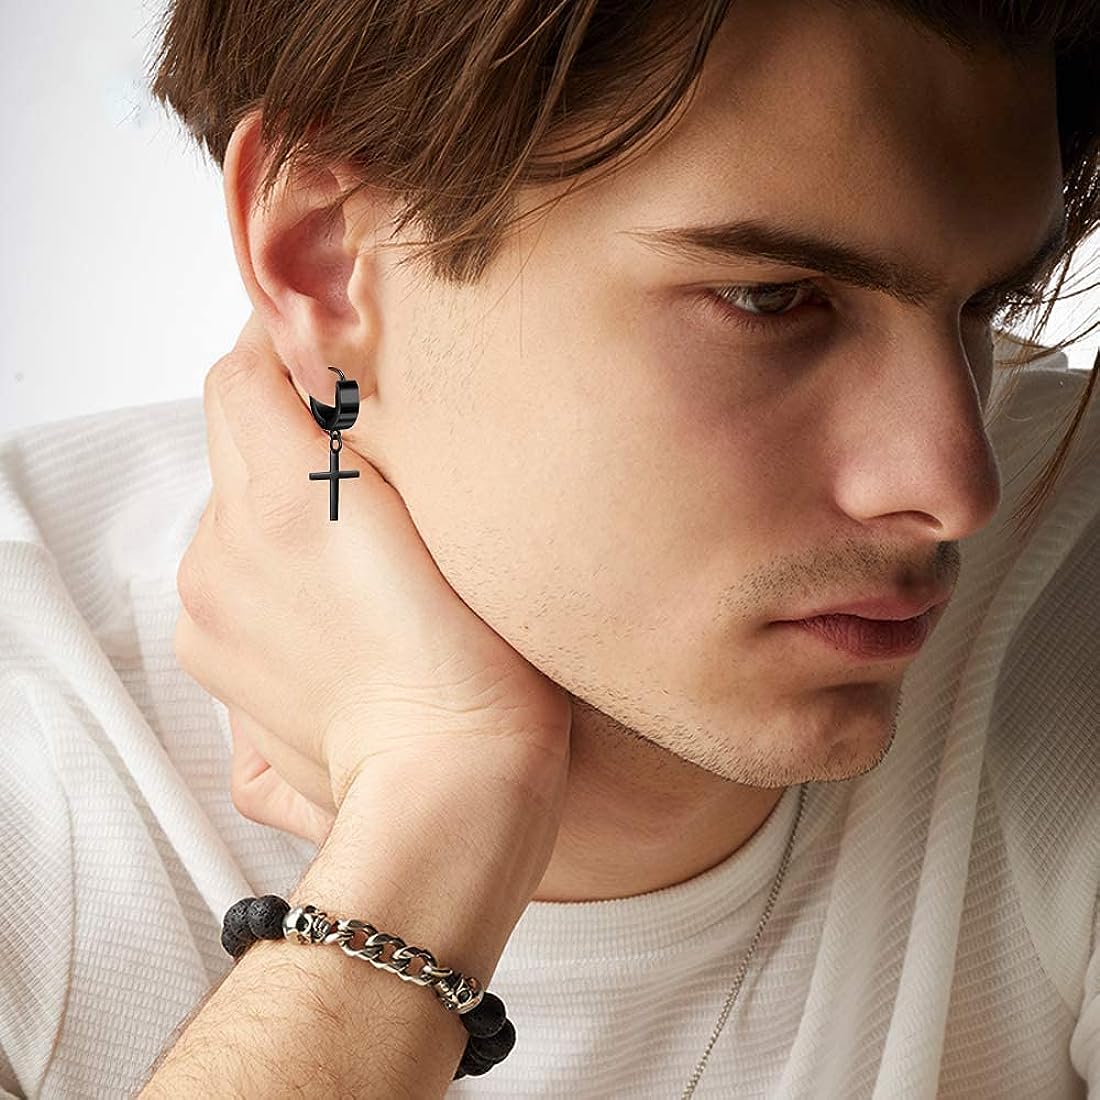 How to choose the right men’s earrings for your personal style插图